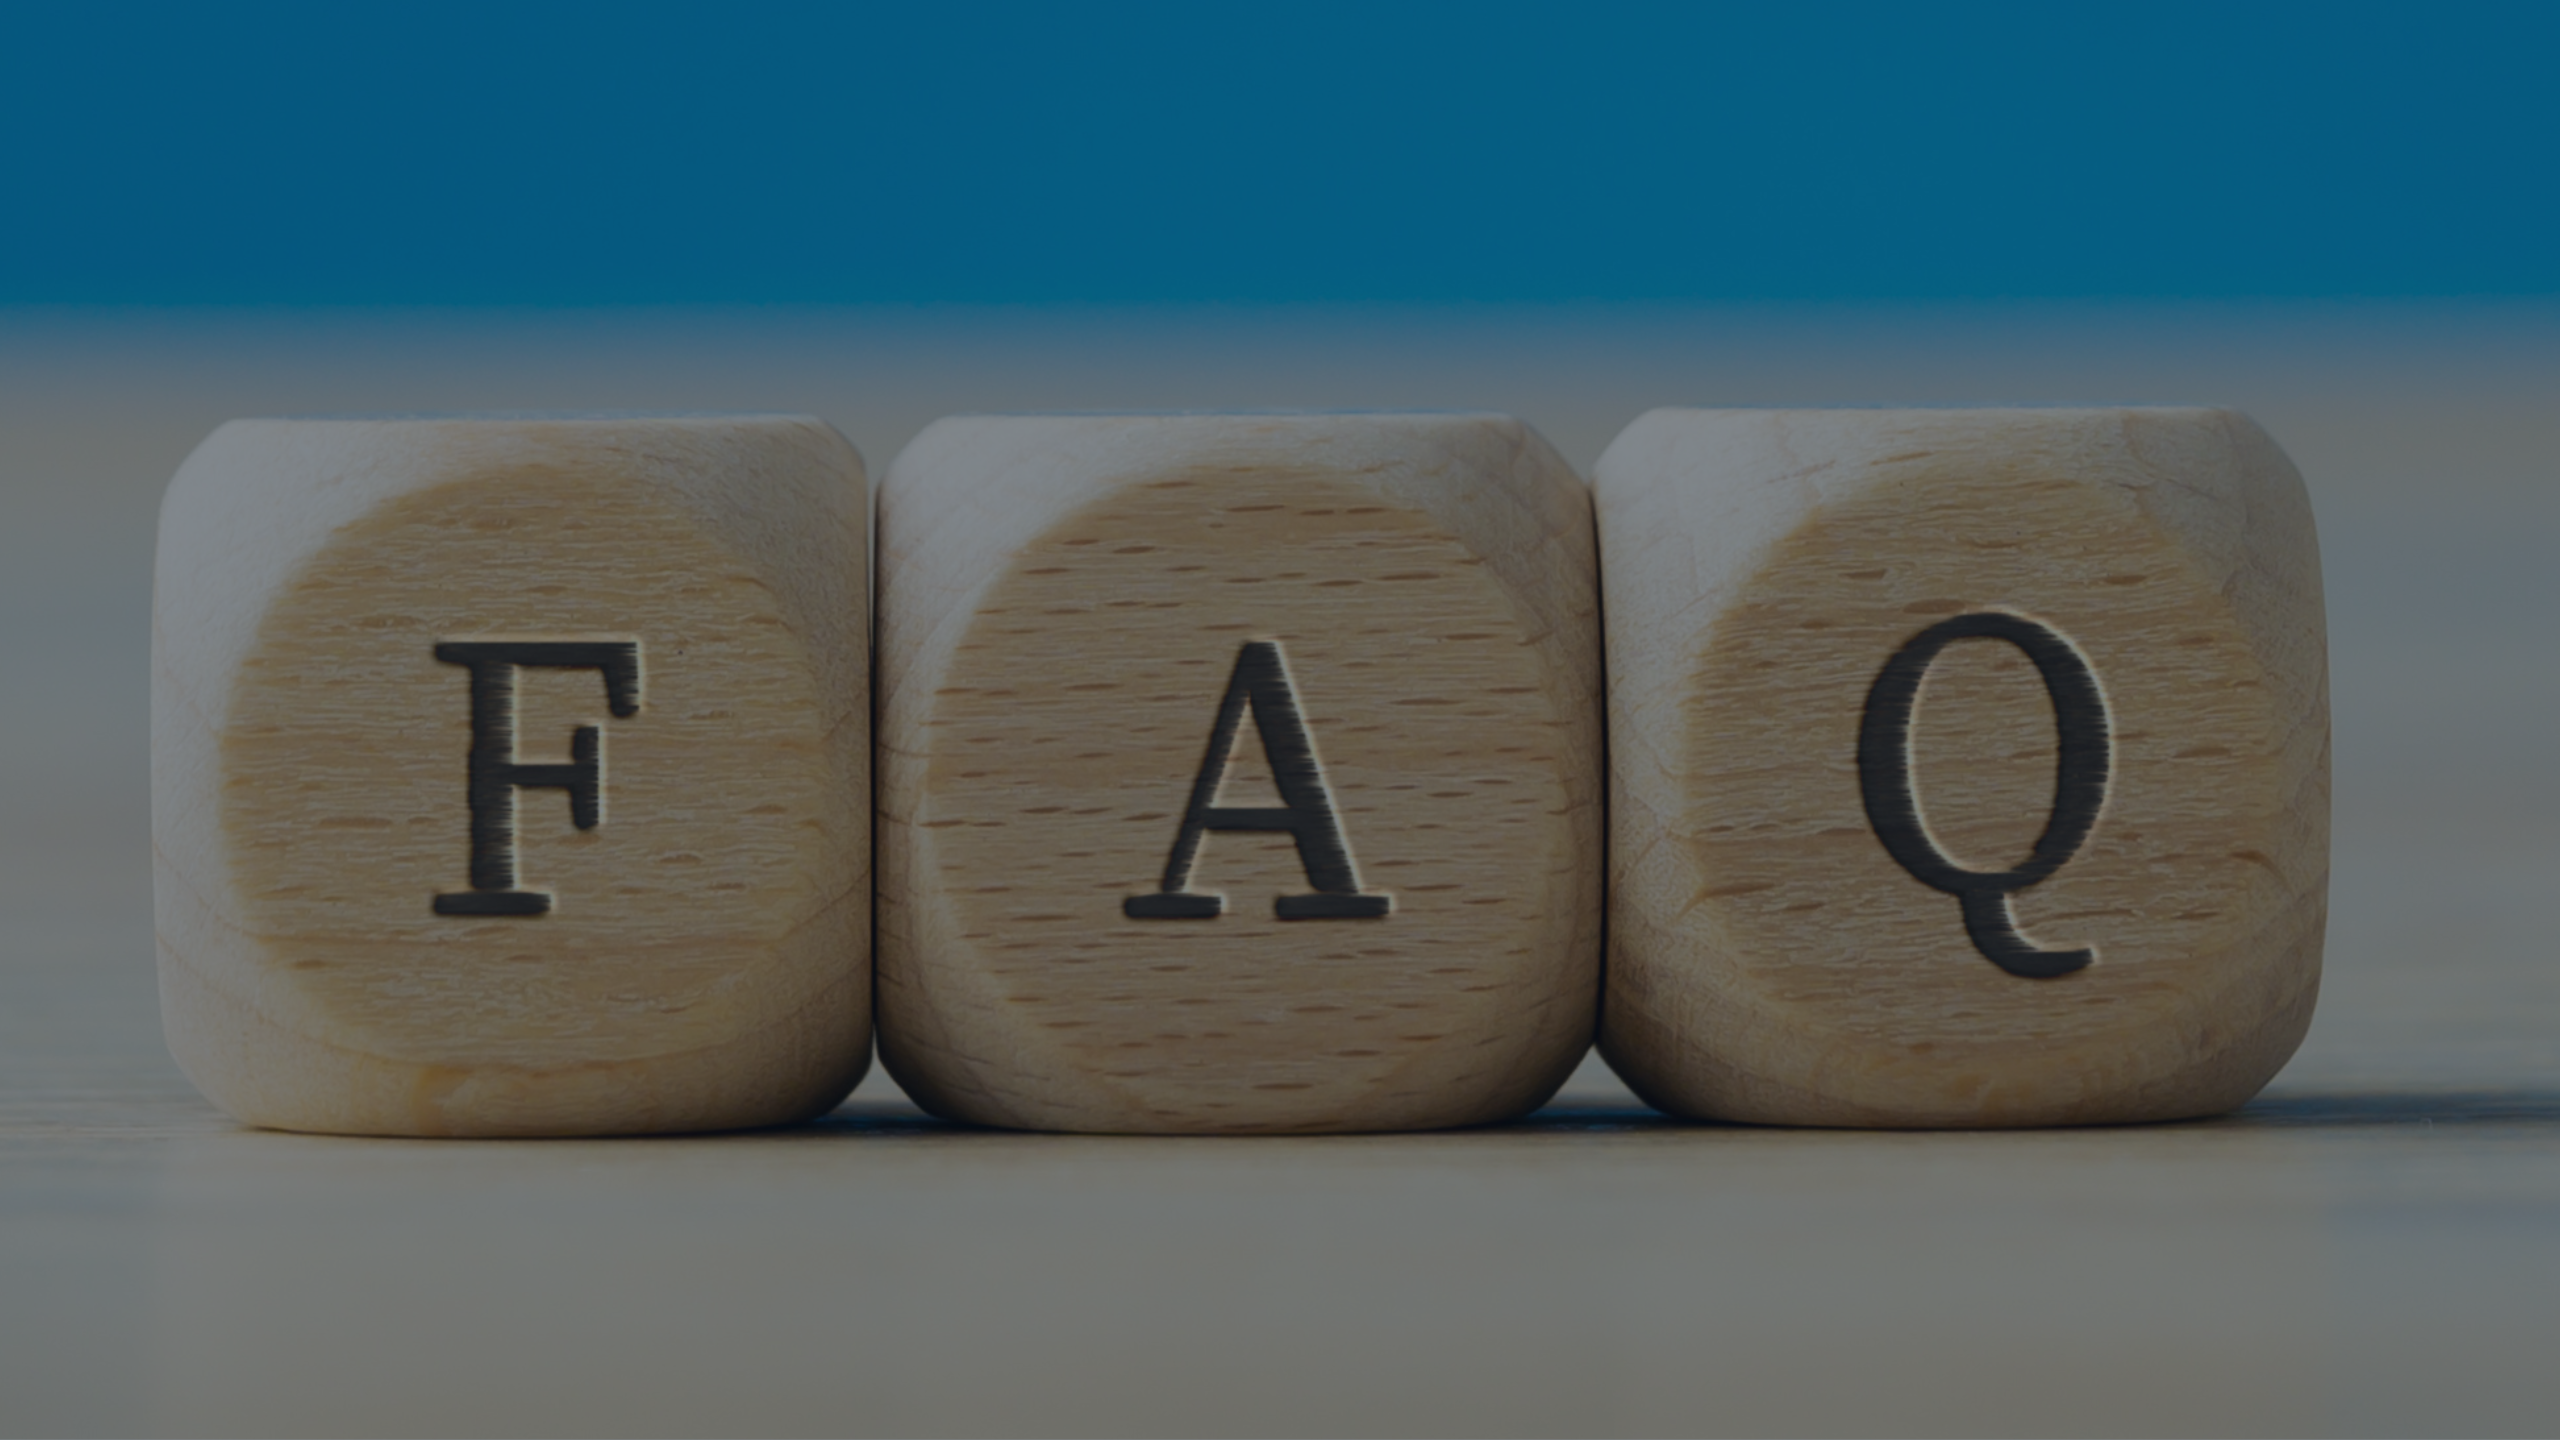 Three wooden letter blocks, FAQ, on a wooden surface against a blue wall for Importer of Record